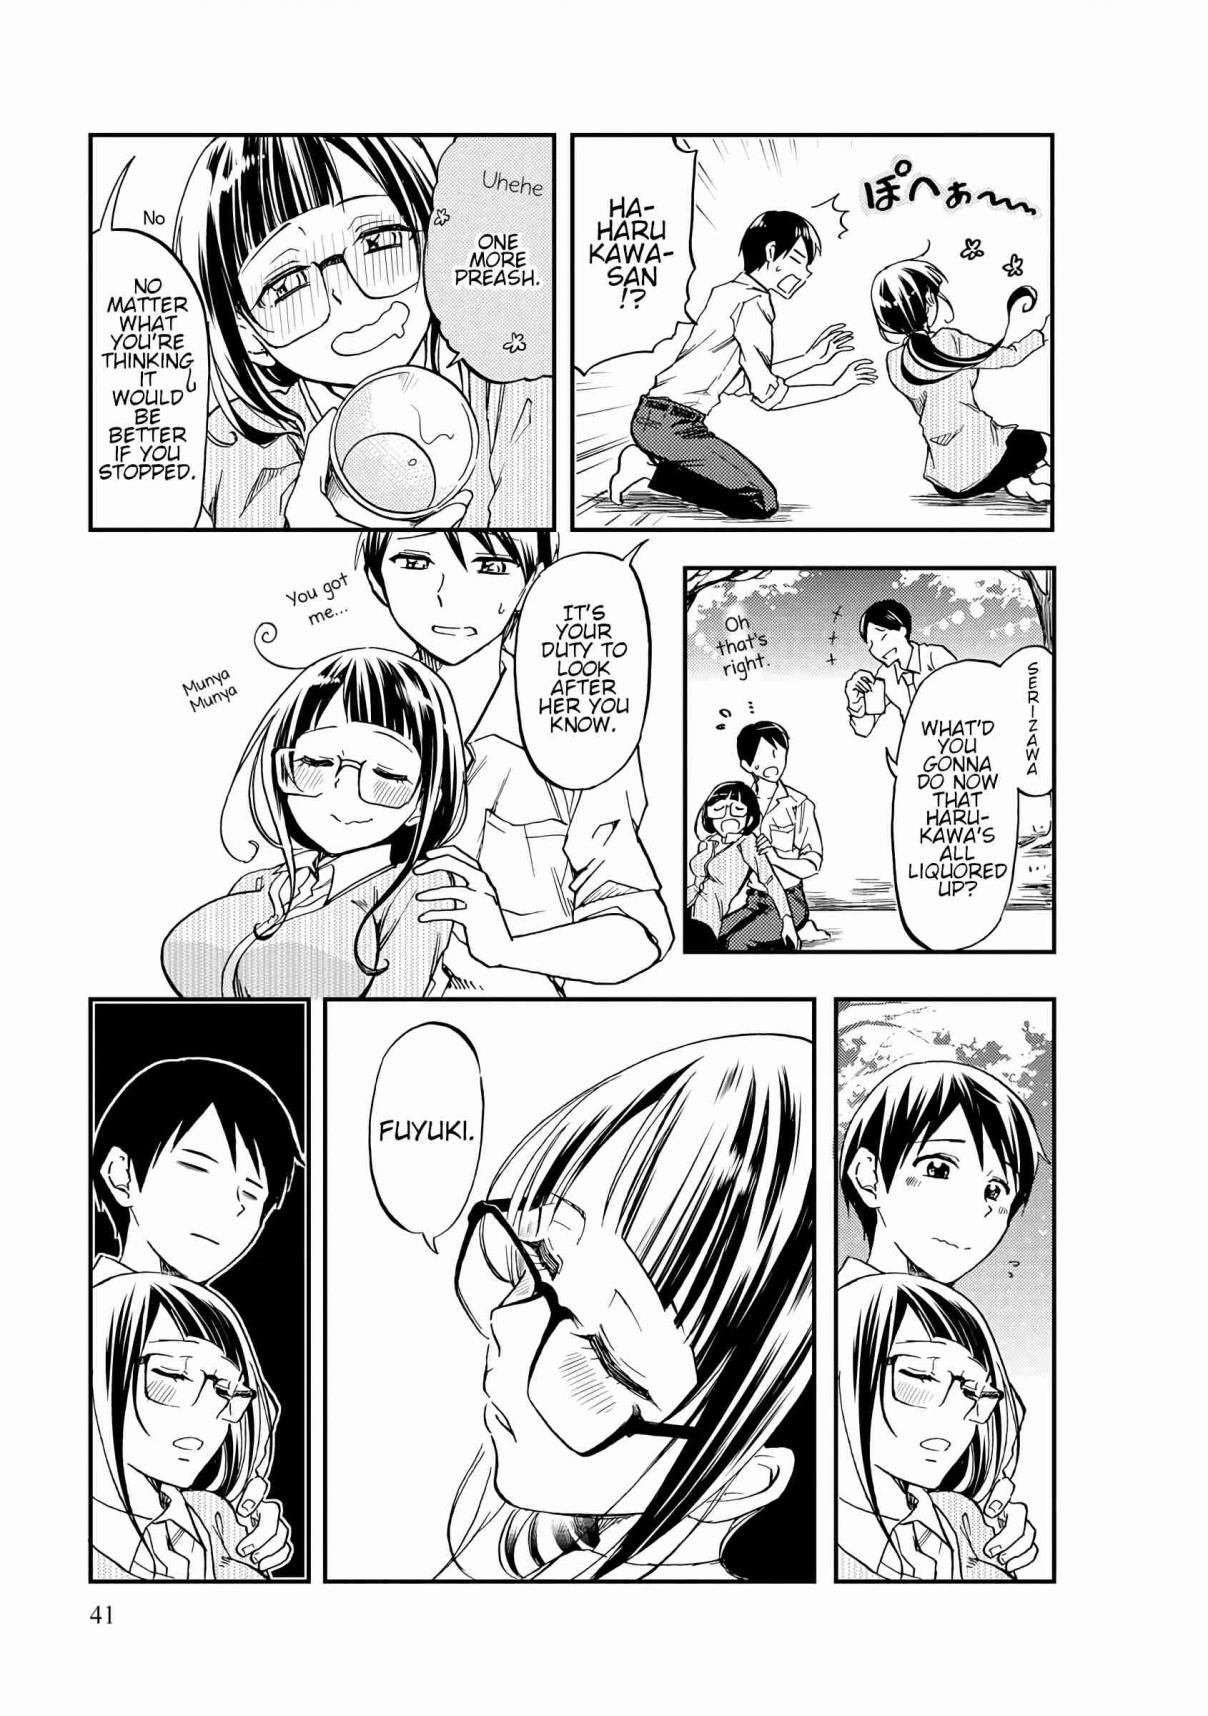 Harukawa san is Hungry Today Too. Vol. 1 Ch. 4 All You Can Eat At The Flower Viewing Party